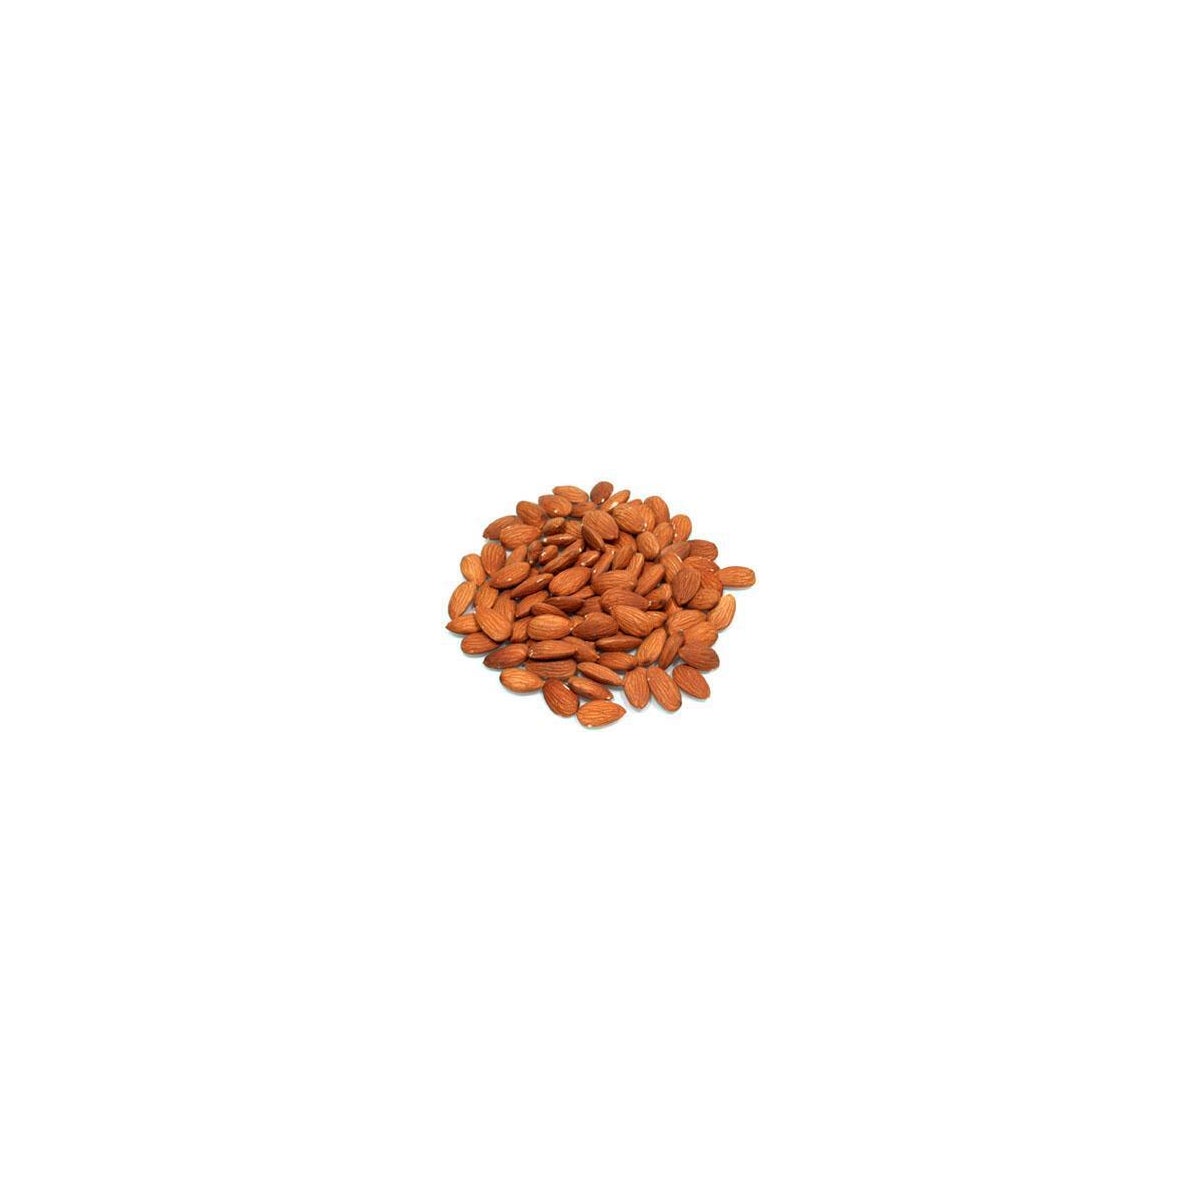 RAW WHOLE ALMOND  (PACK OF 1 LB)